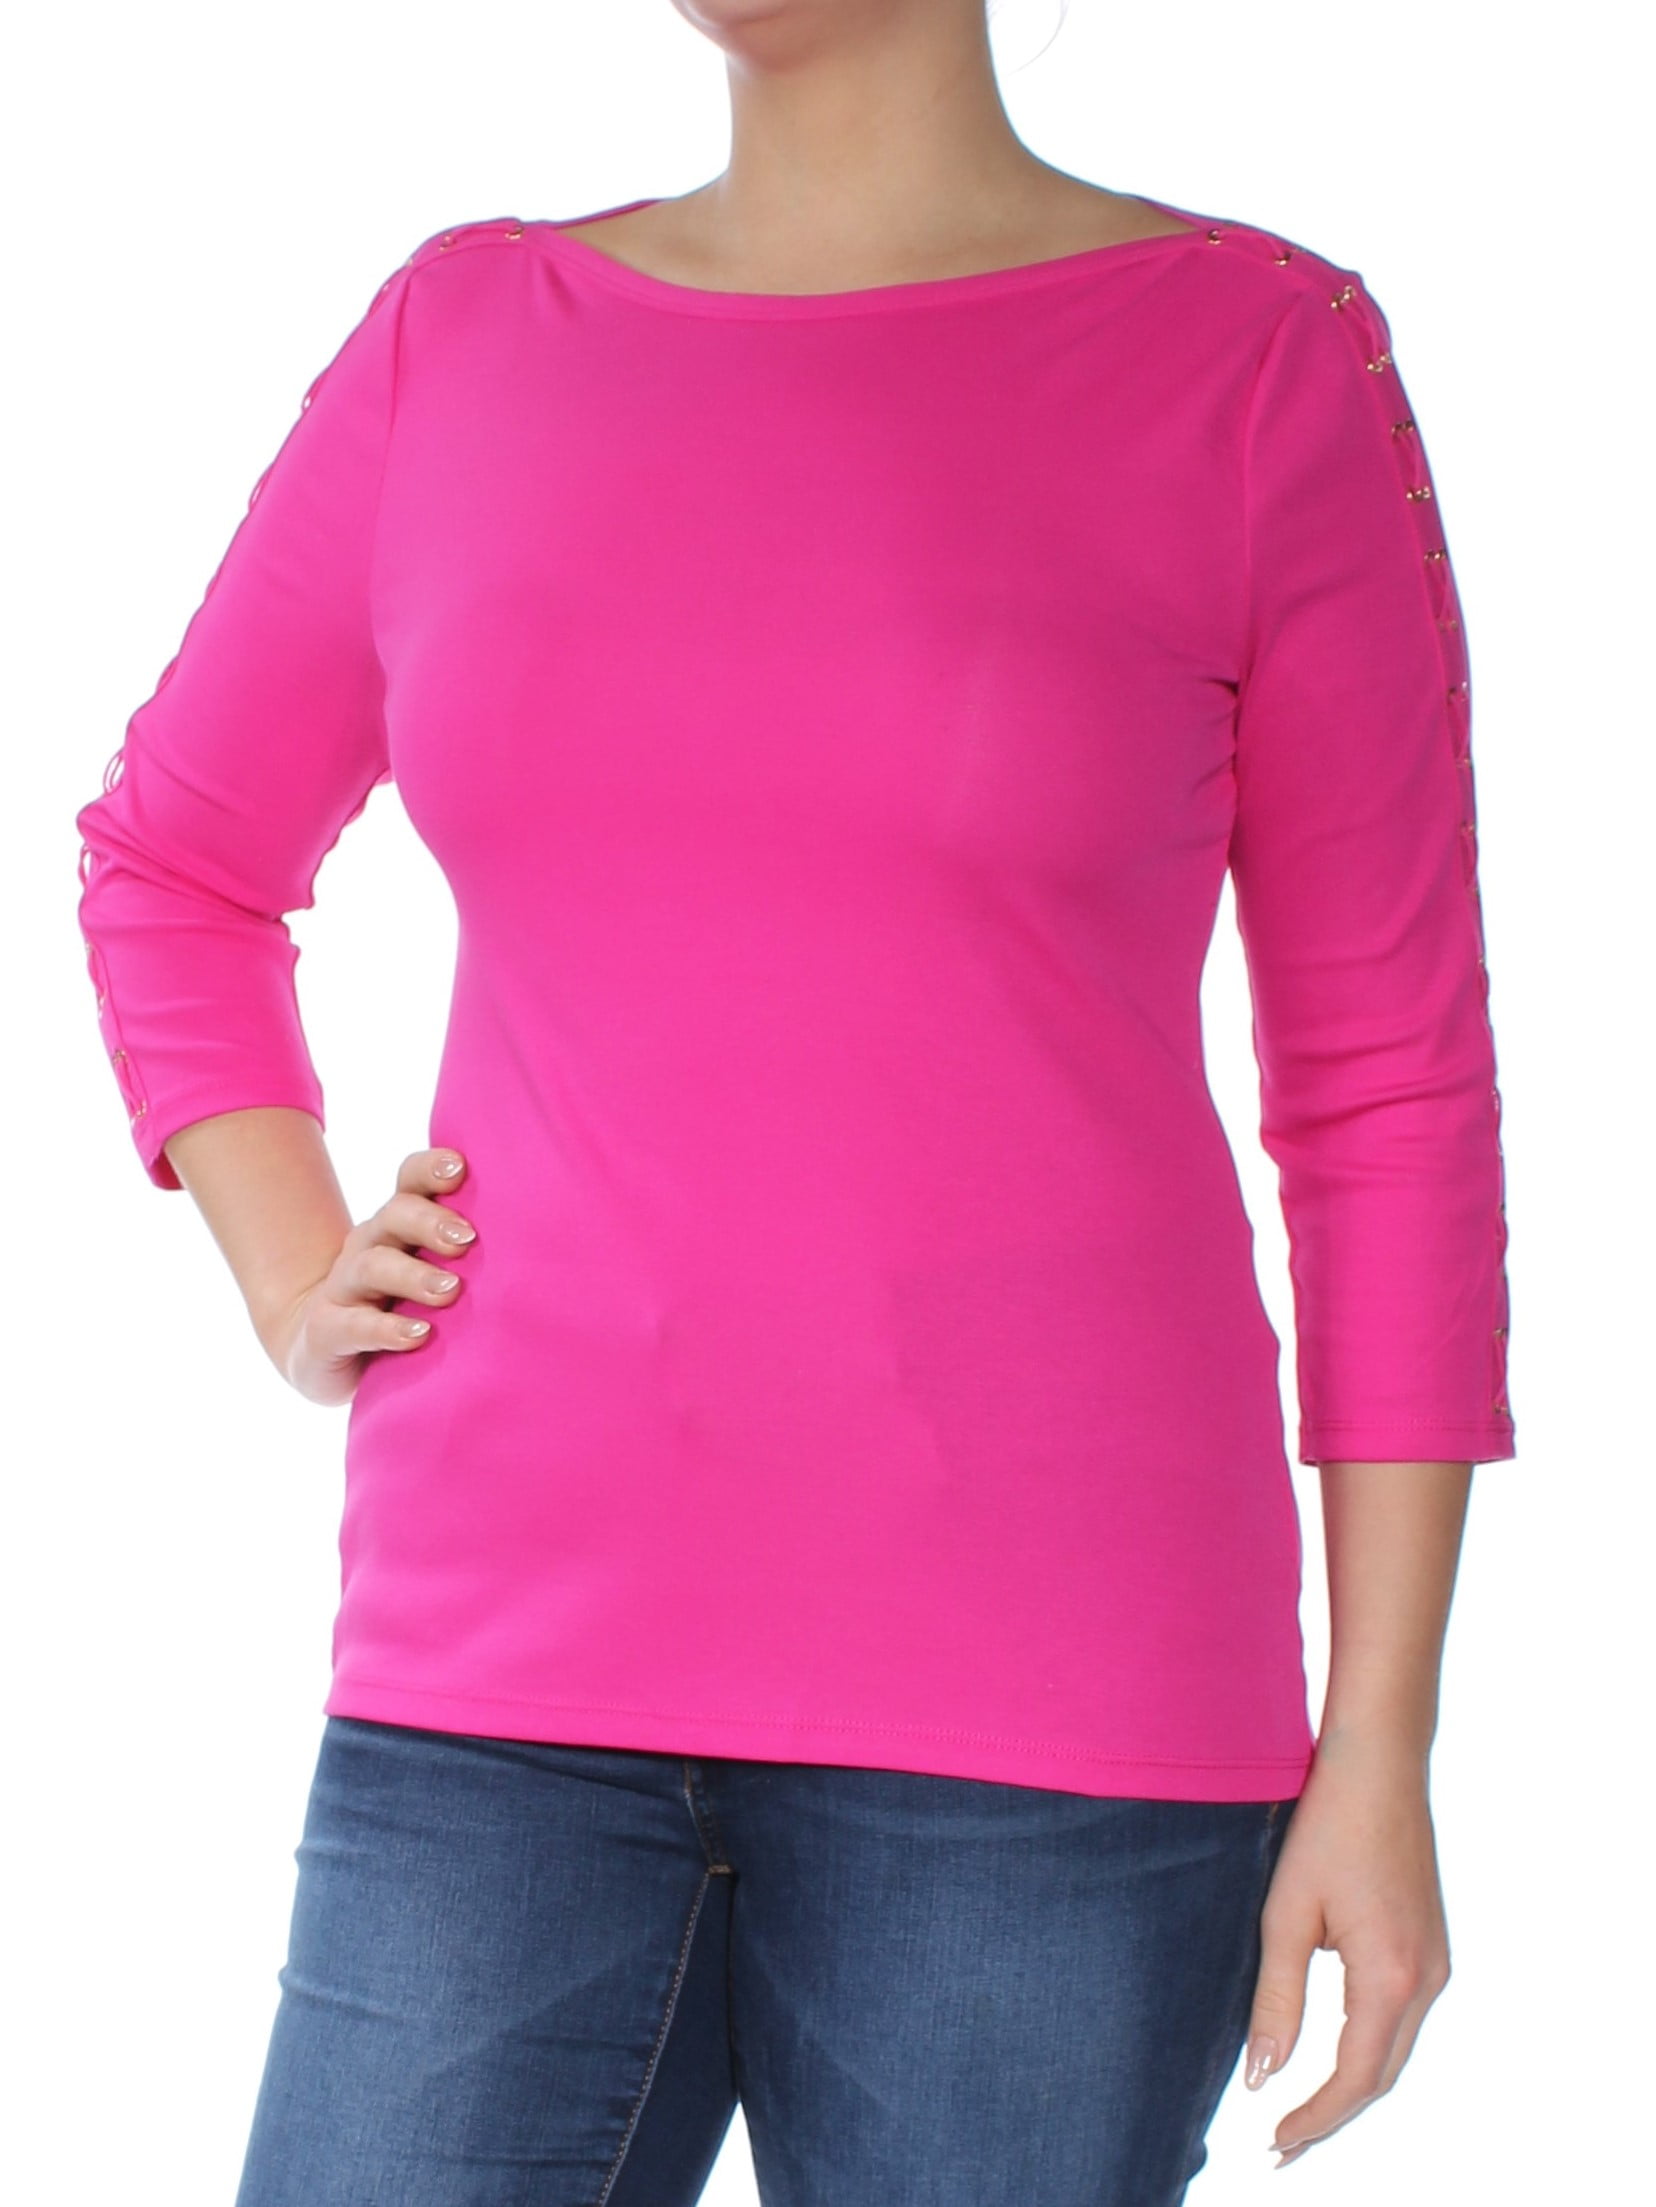 RALPH LAUREN Womens Pink Embellished 3/4 Sleeve Boat Neck Tunic Top XL ...